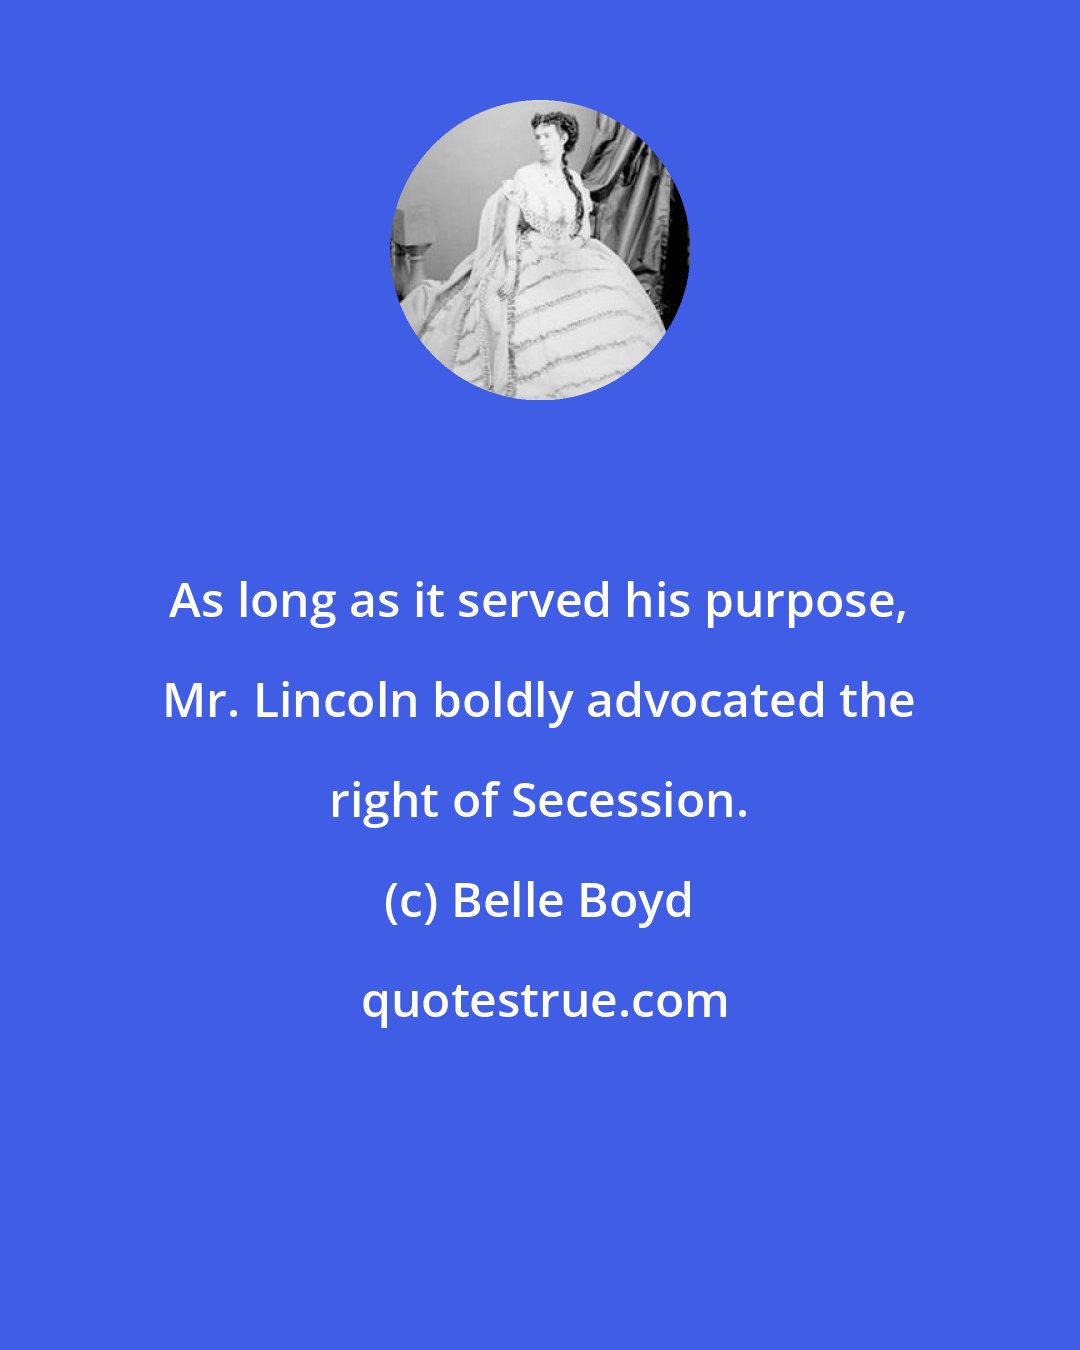 Belle Boyd: As long as it served his purpose, Mr. Lincoln boldly advocated the right of Secession.